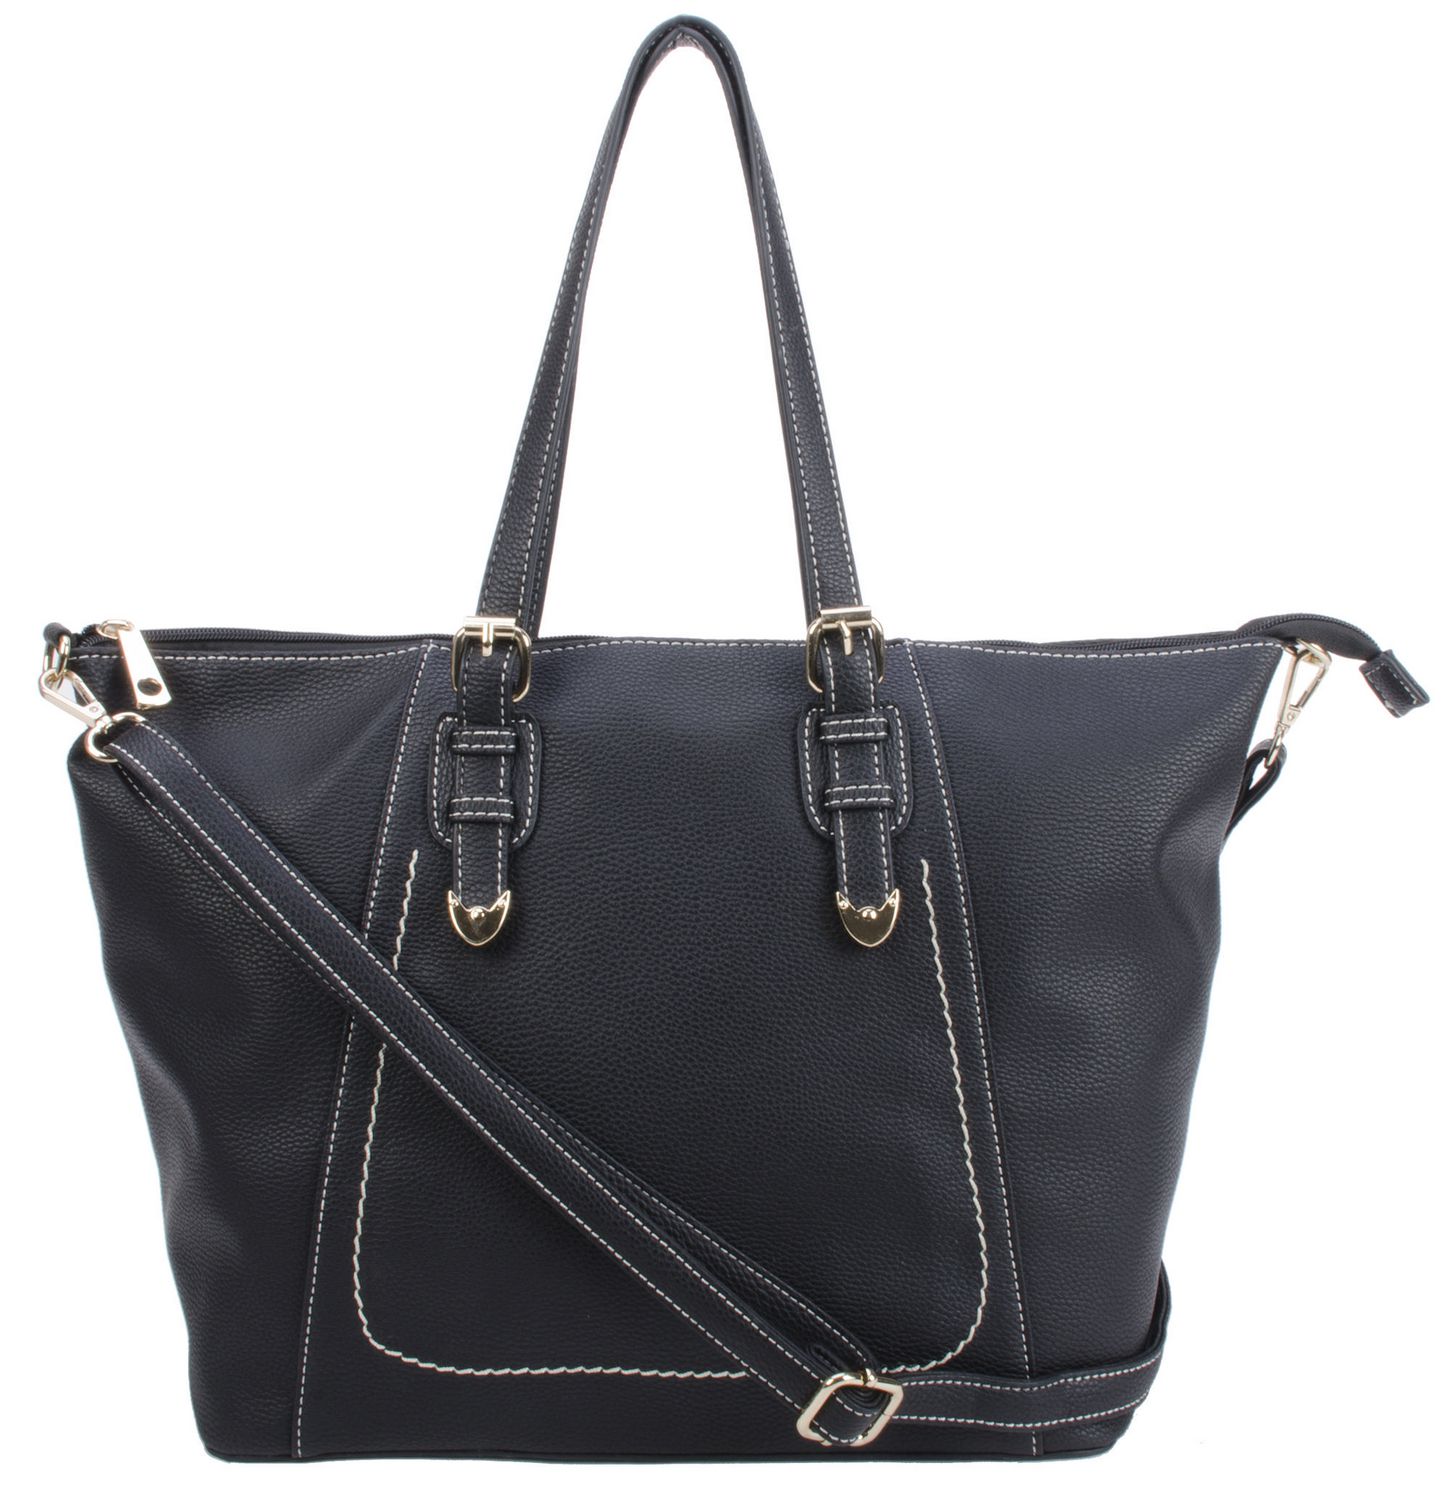 AMF Large Tote with Cross-body Detachable Strap | Walmart Canada